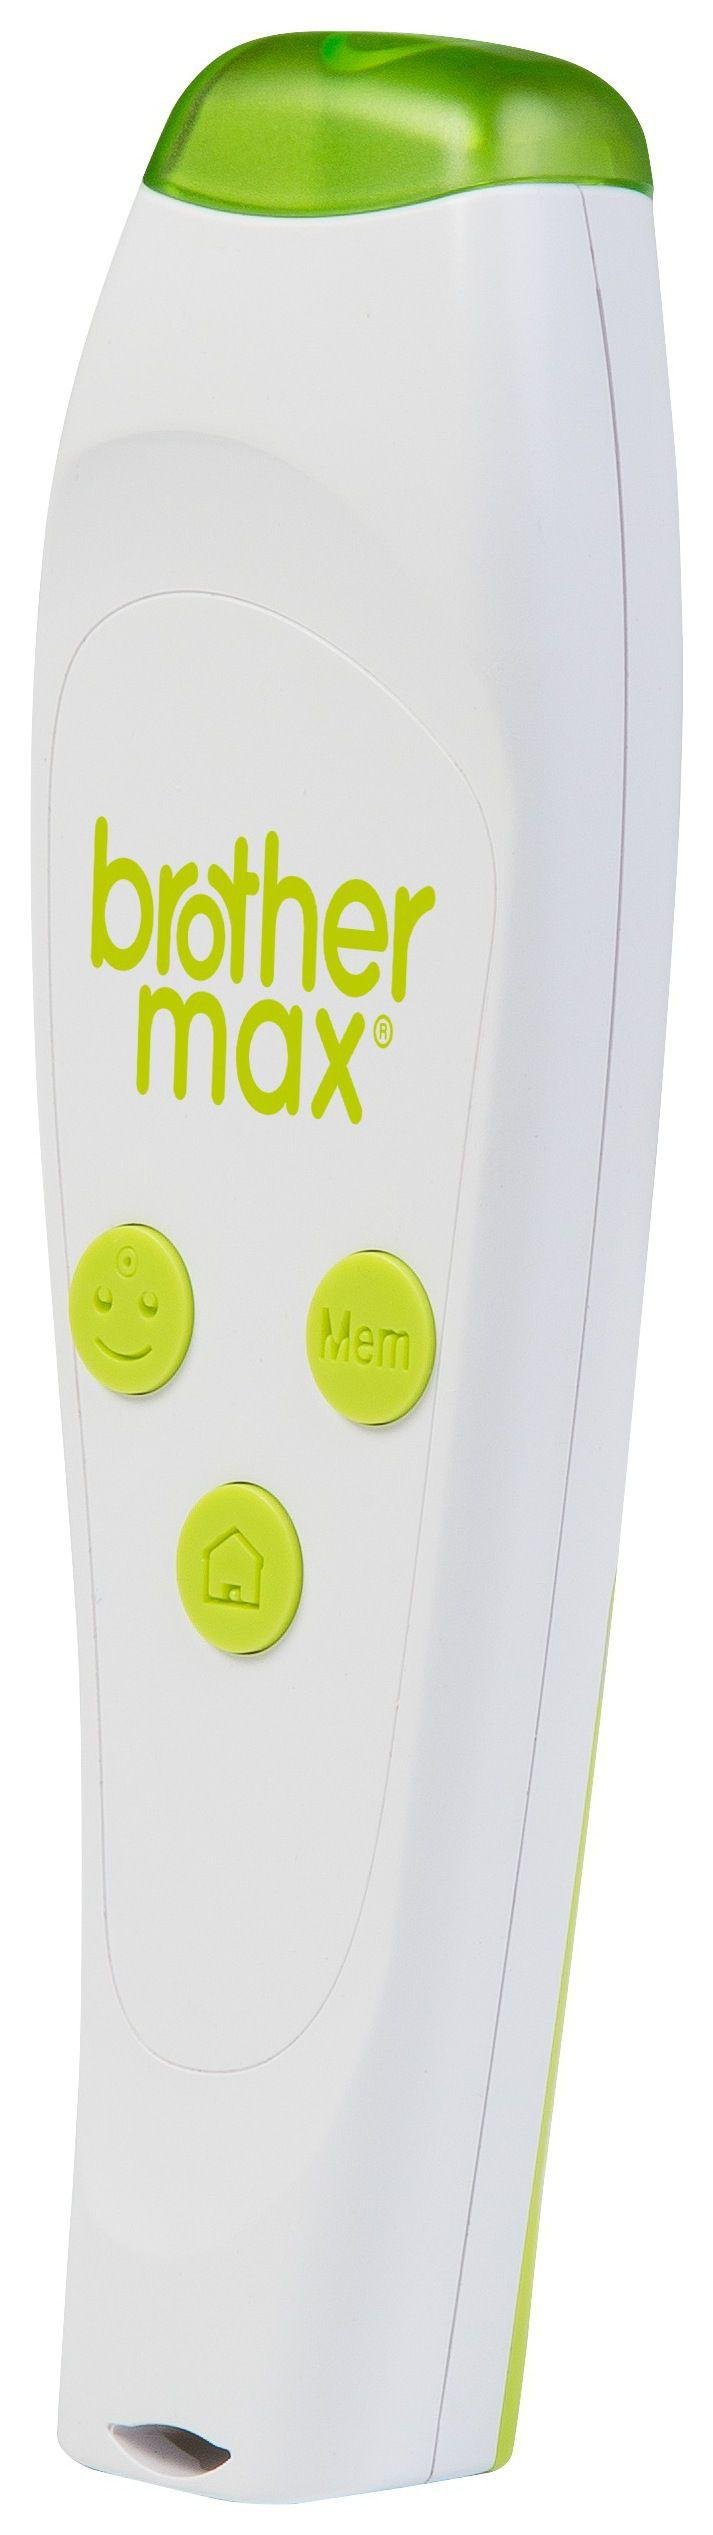 Brother Max 6 in 1 Projection Non Contact Thermometer.